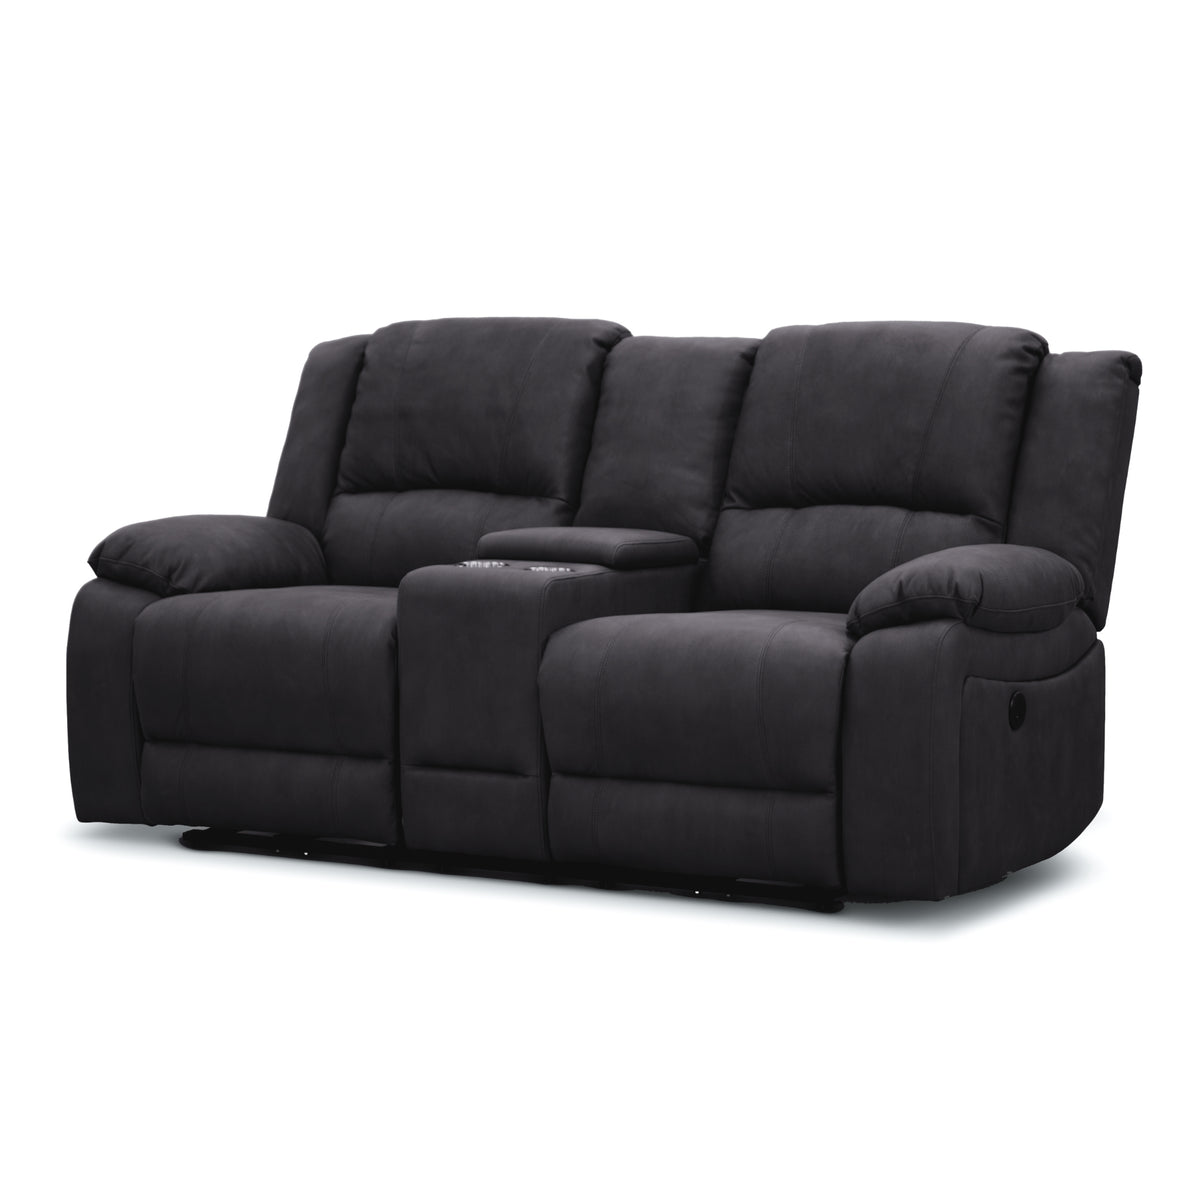 Anderson Fabric Electric Recliner Sofa Lounge Chair JET Dark Grey 2 + 3 Seater